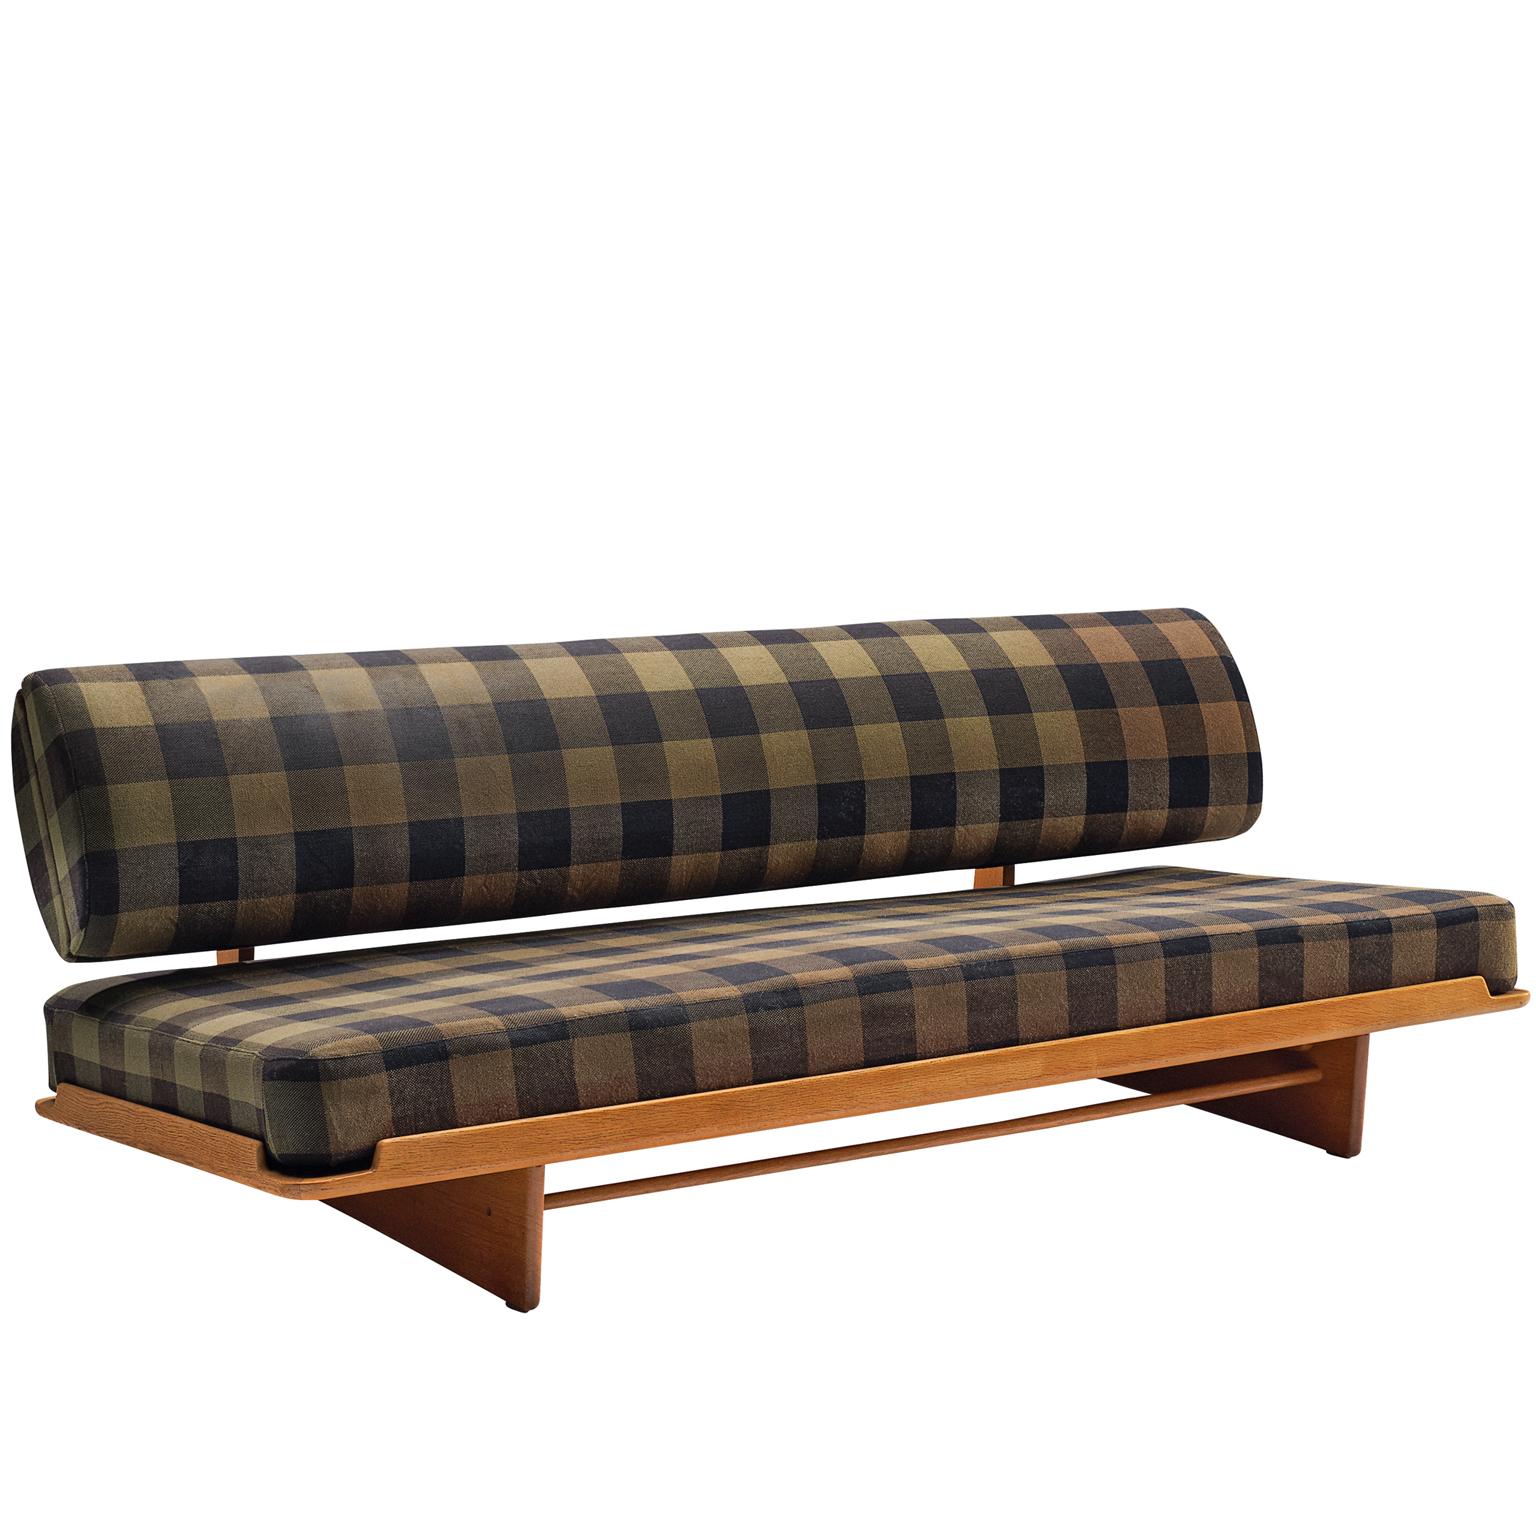 Grete Jalk Daybed in Oak and Checked Olive Green Black Fabric